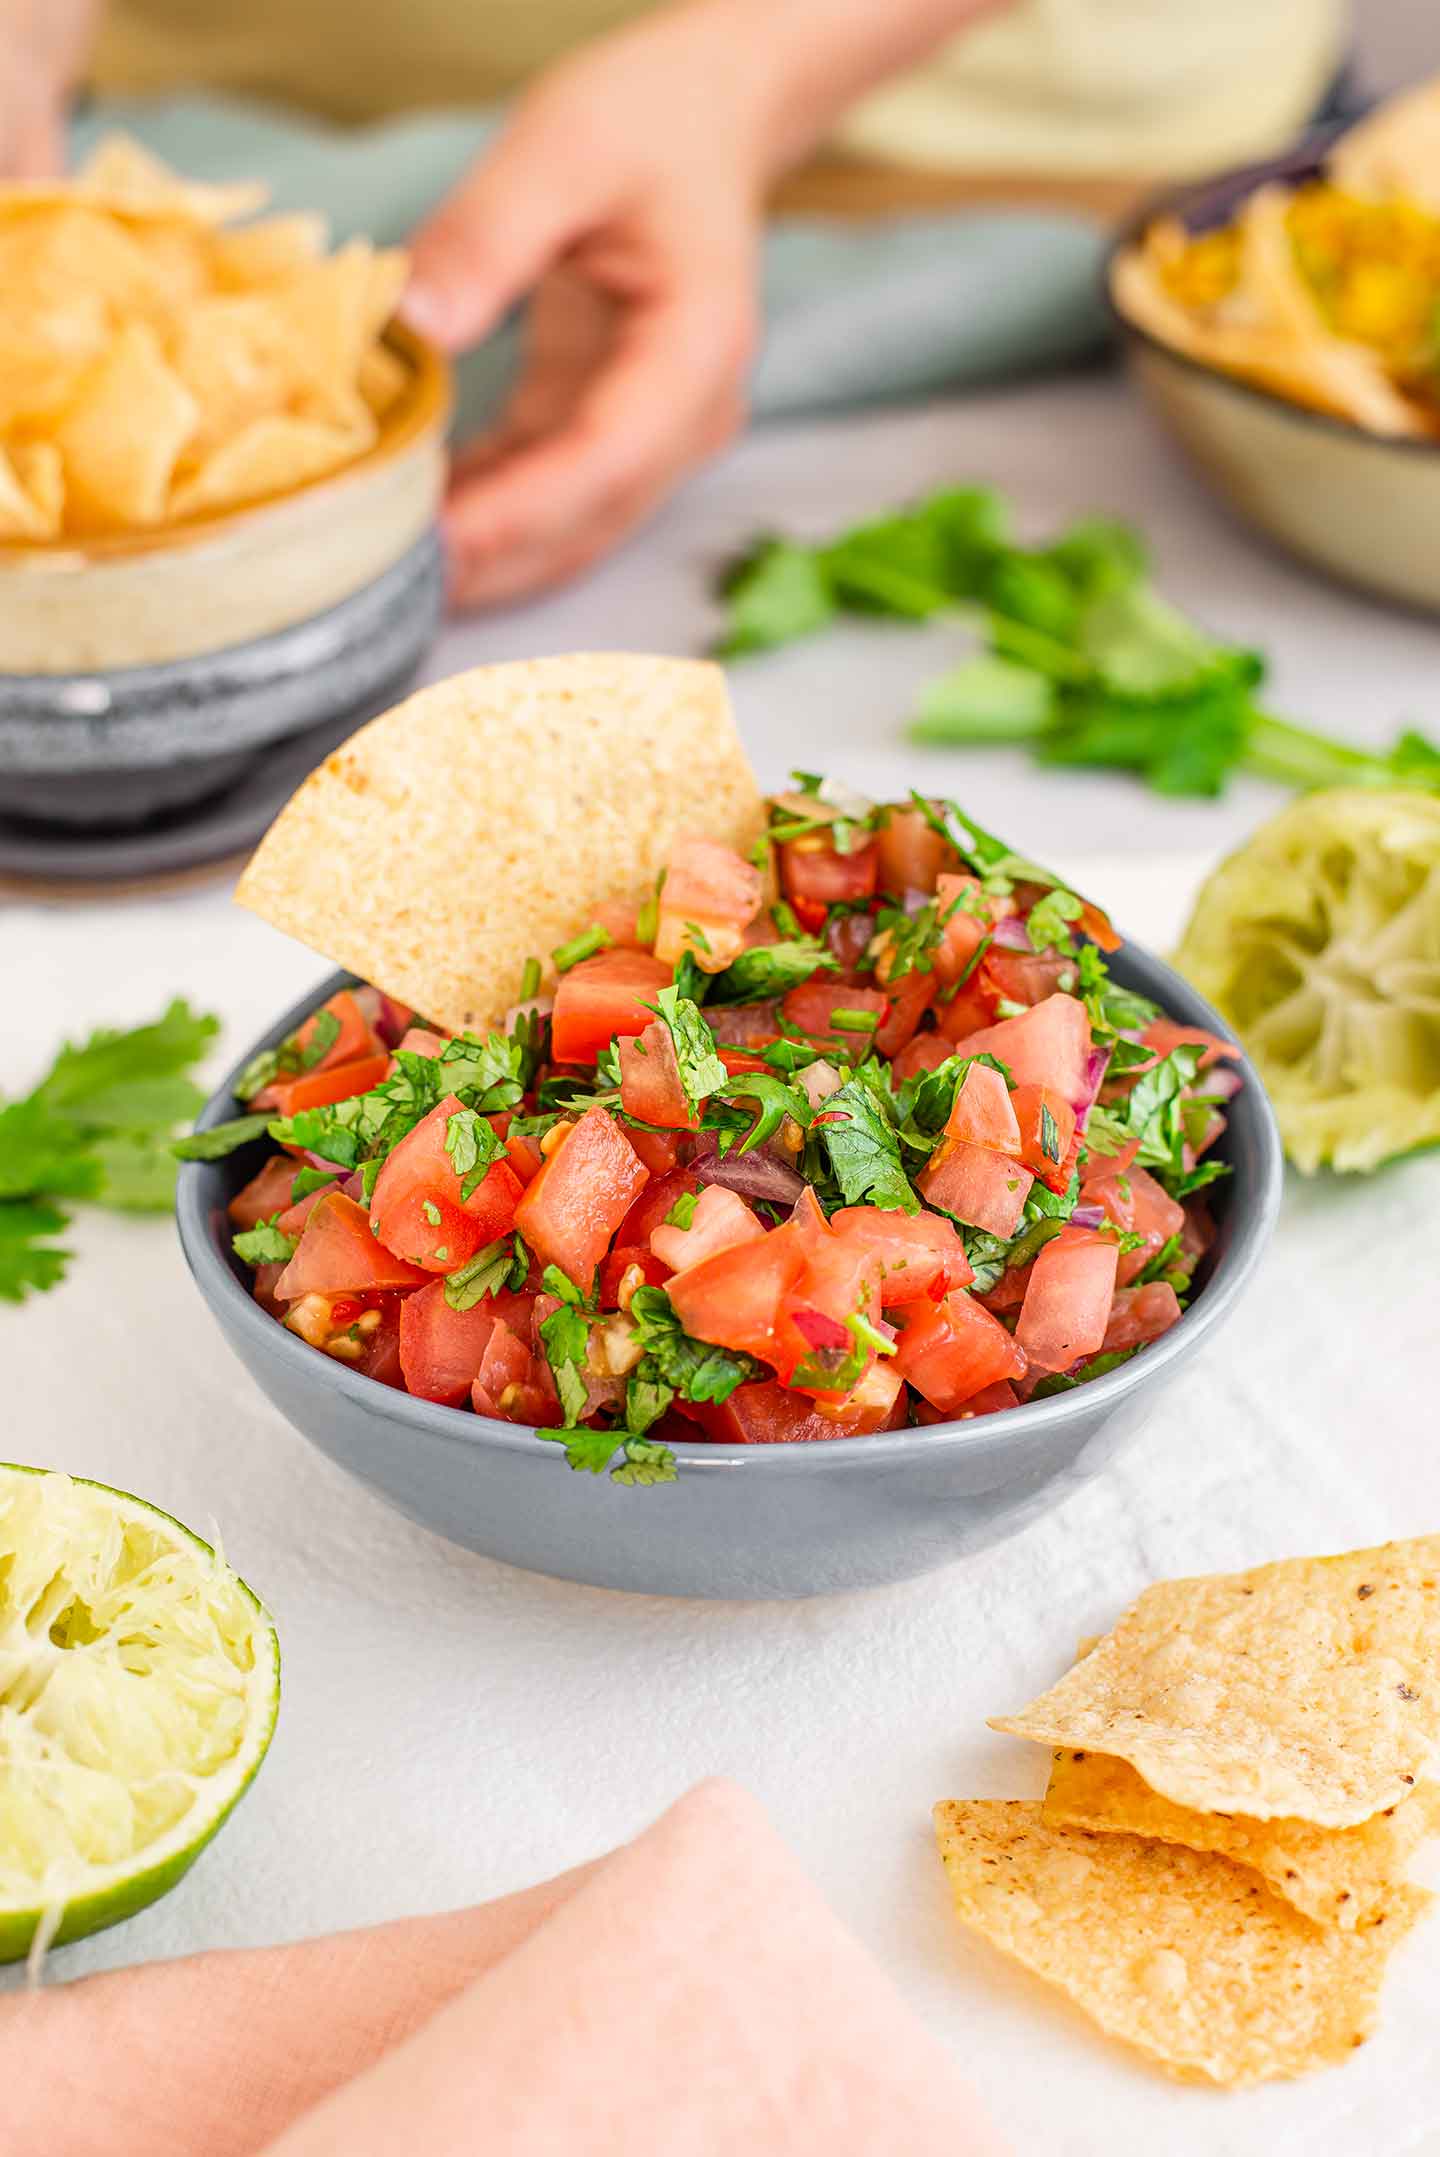 Salsa fresca fills a small dish. A tortilla chip is placed inside the bowl of chunky salsa. Juiced halves of lime, cilantro, and more tortilla chips surround the colourful salsa.